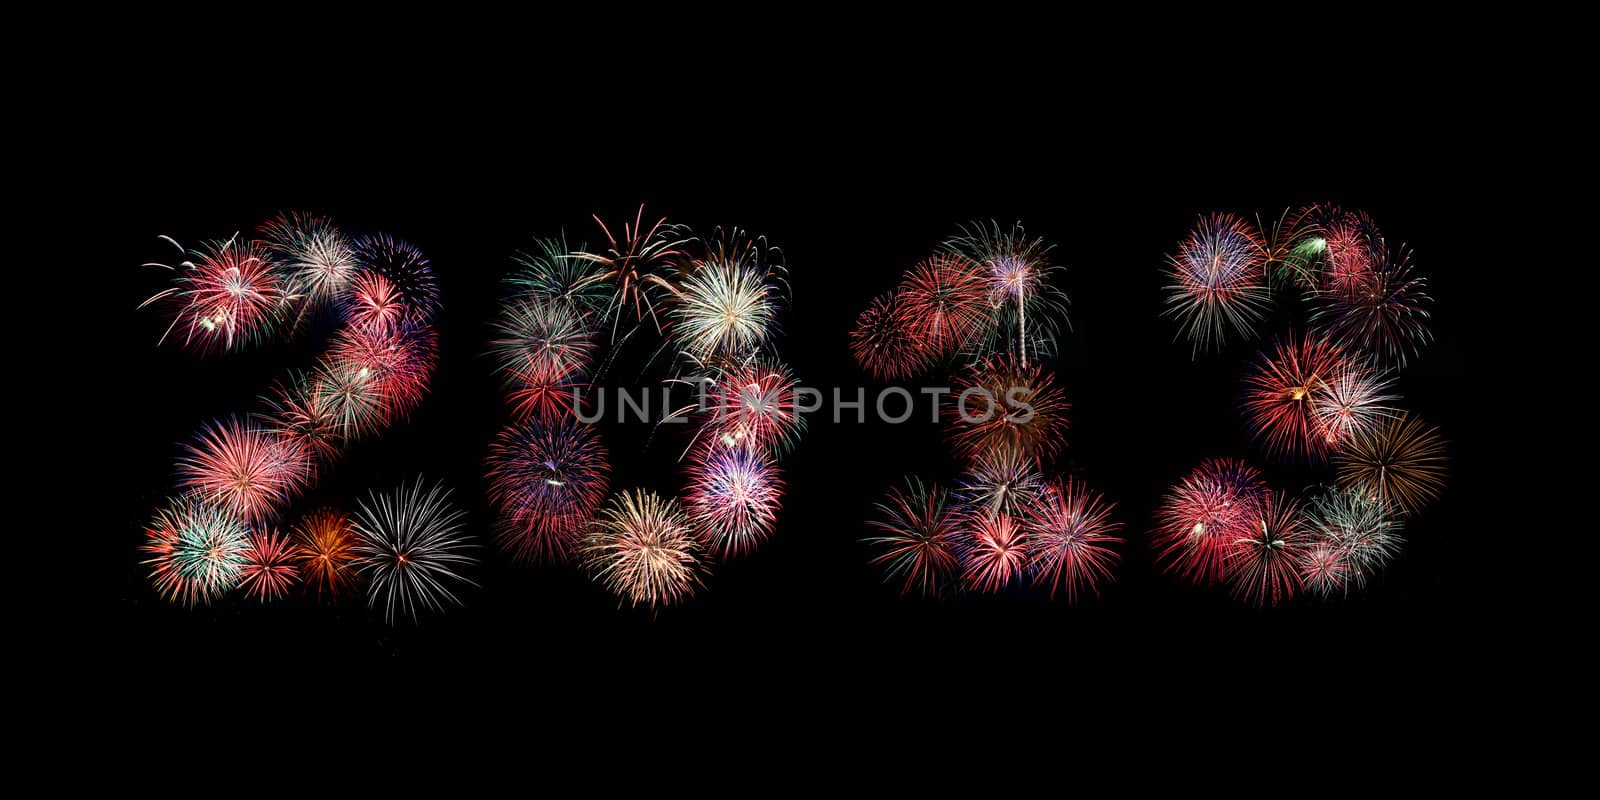 Multiple bursts of colorful fireworks were used to write out the new year 2013 against a black background